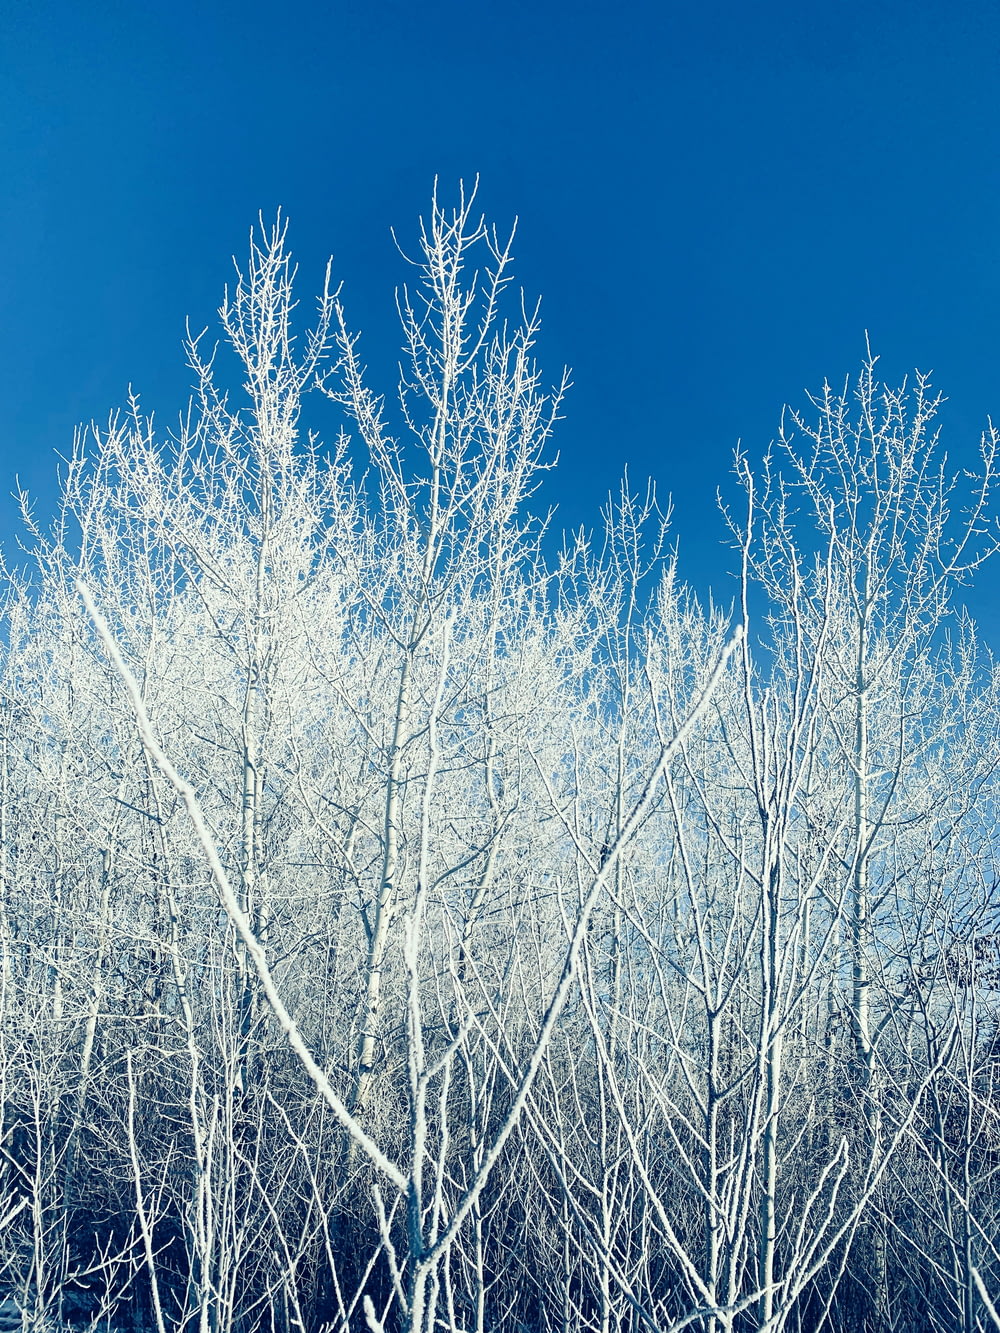 a group of trees covered in snow against a blue sky